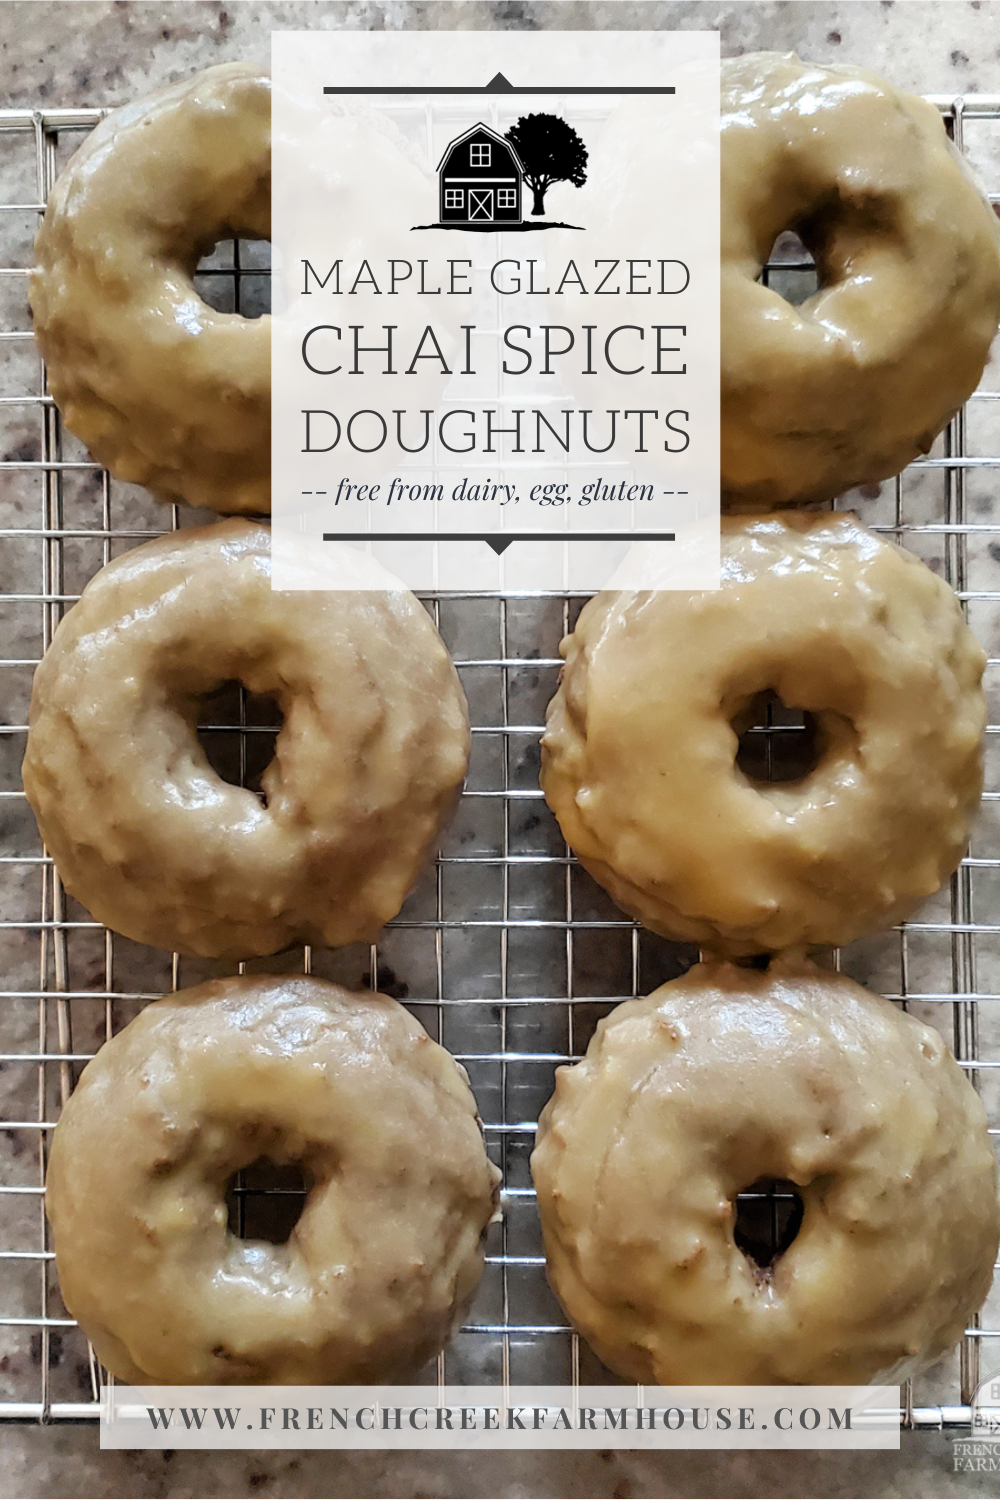 These gluten-free chai spiced doughnuts are baked, not fried, lower-sugar, and also free from egg and dairy. The perfect guilt-free treat!